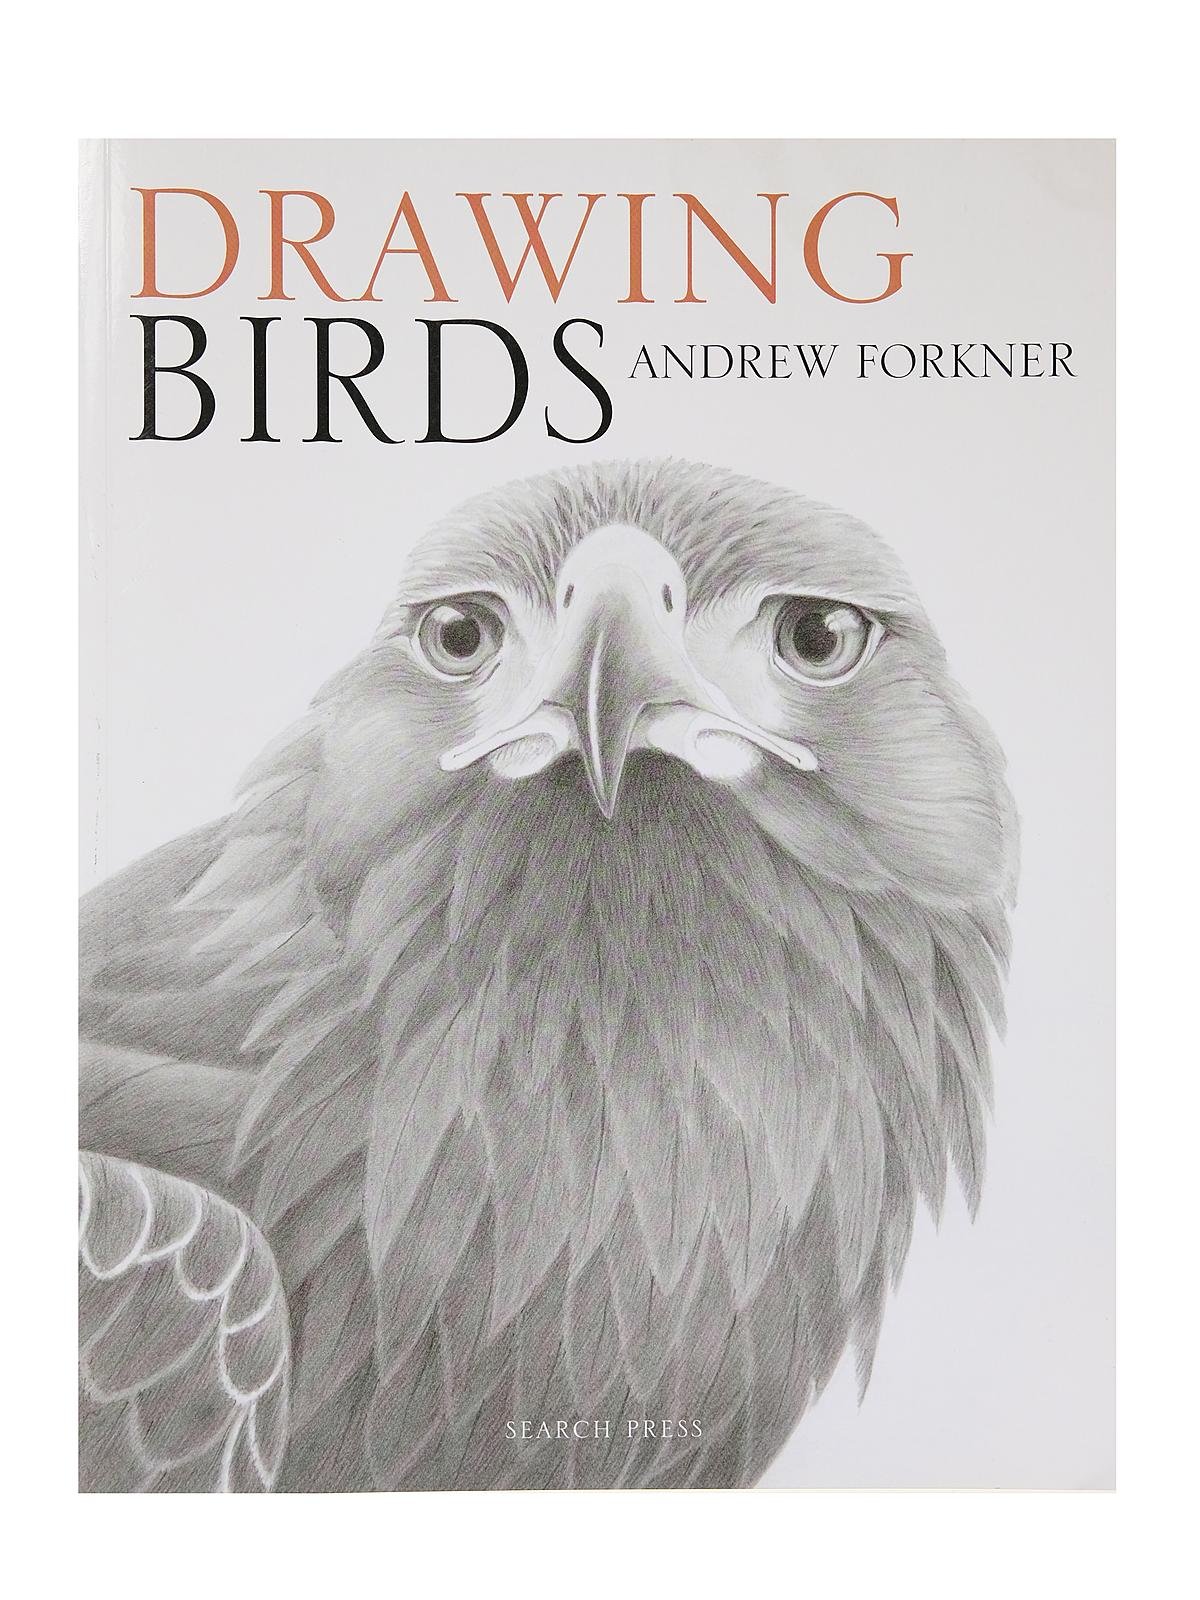 Search Press Drawing Birds